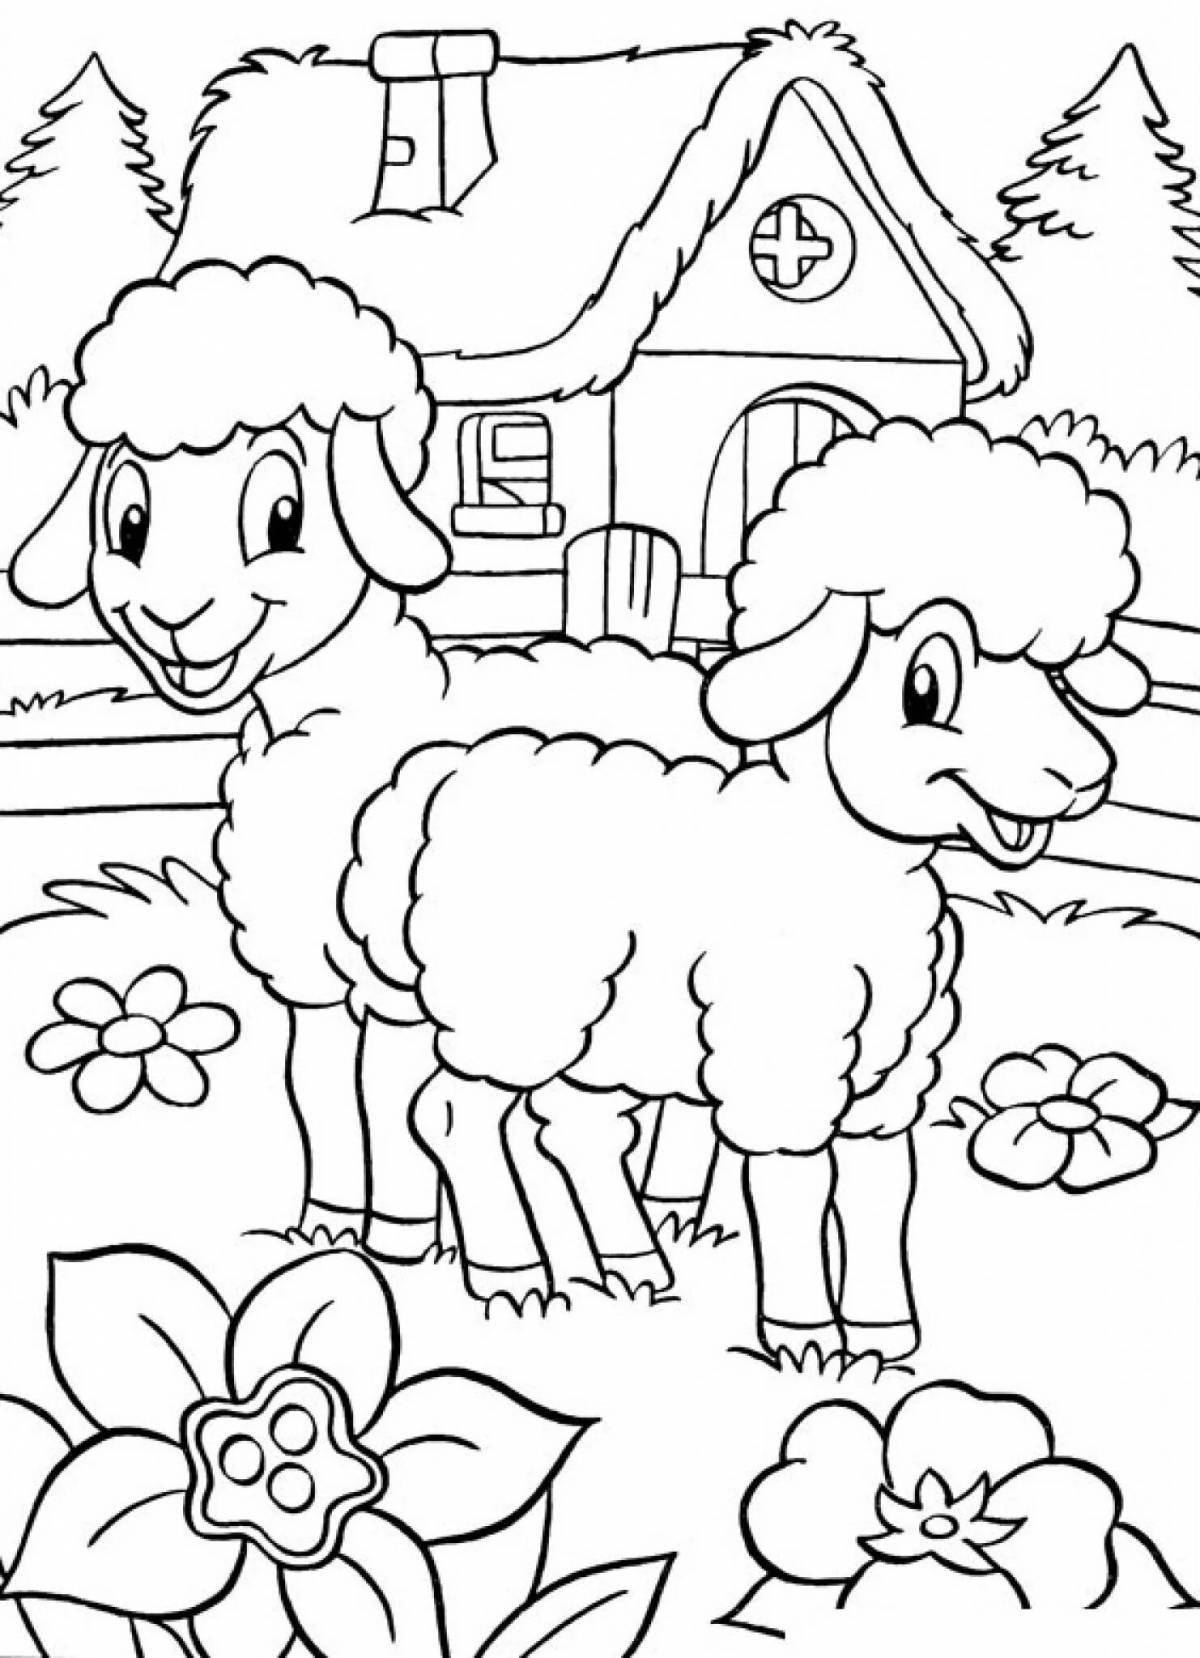 Inviting farm coloring for kids